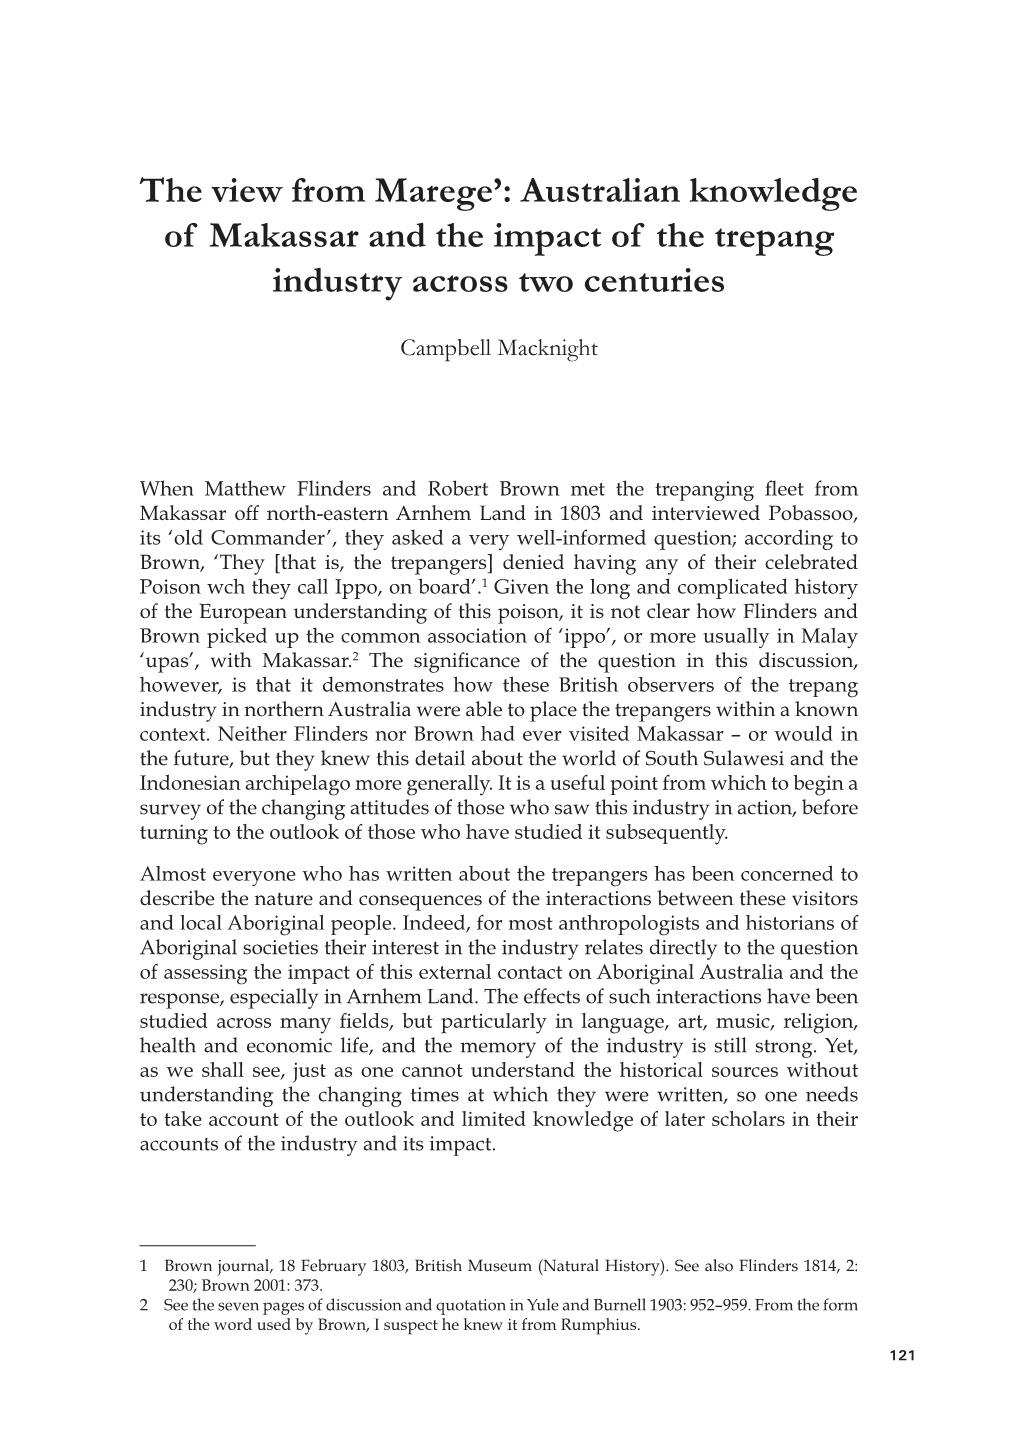 Australian Knowledge of Makassar and the Impact of the Trepang Industry Across Two Centuries